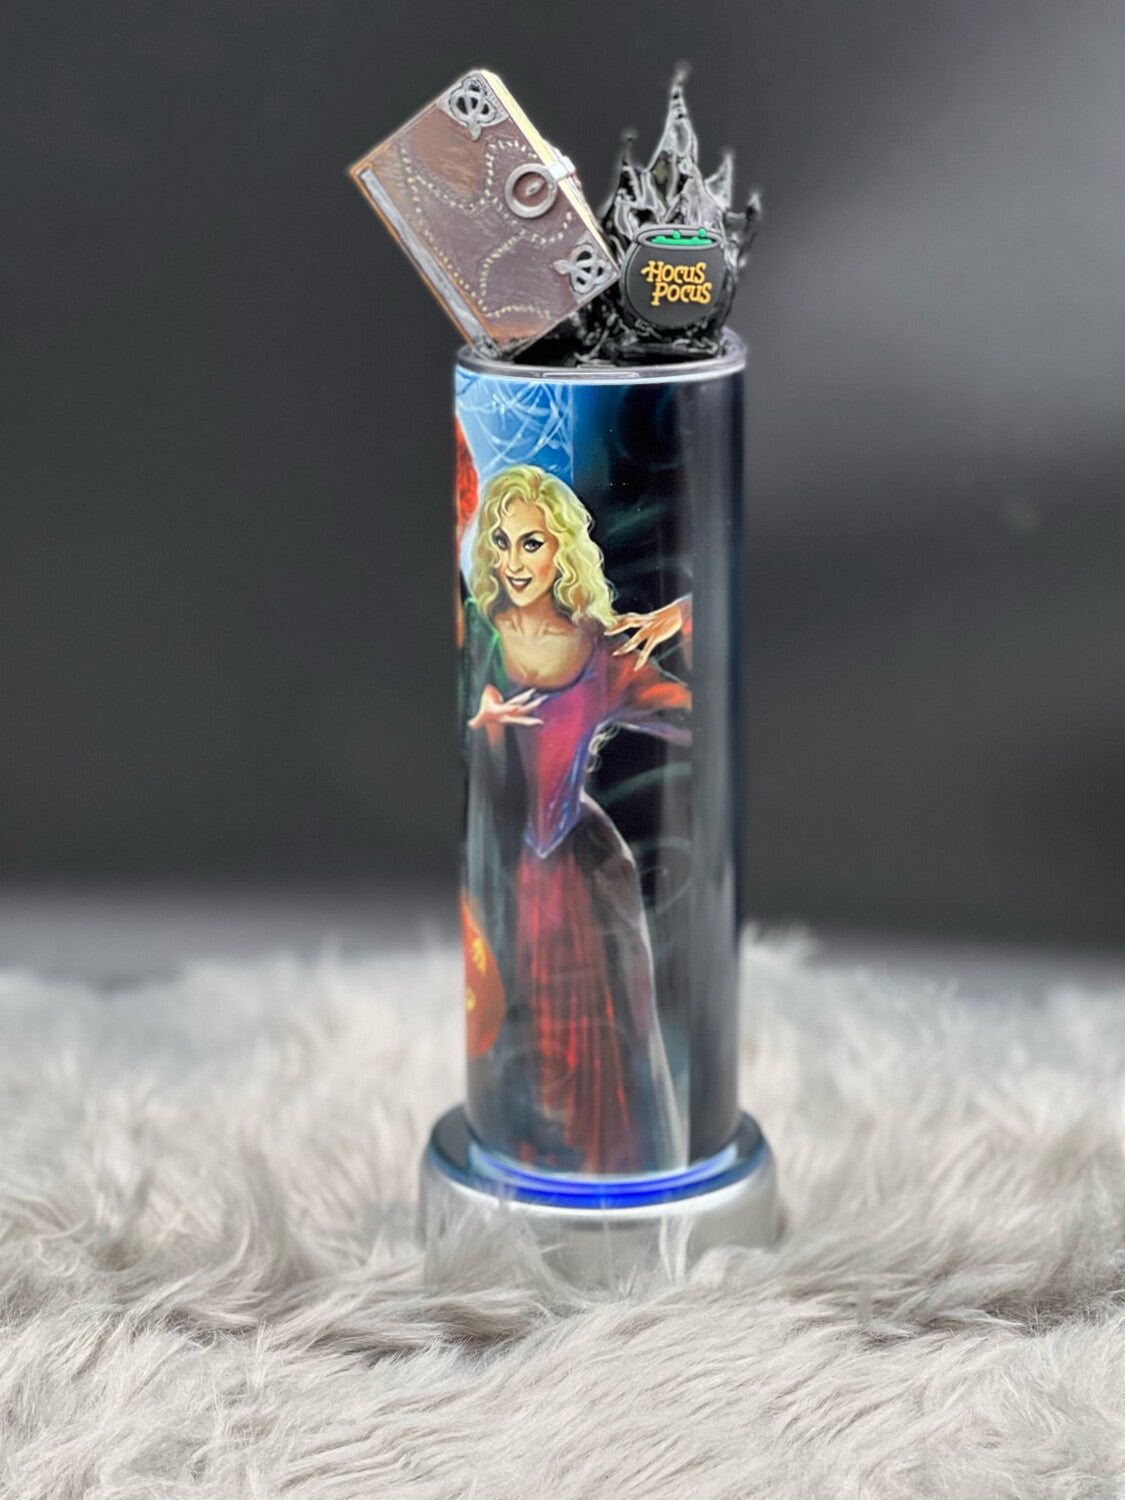 20oz Sanderson Sisters Stainless Steel Tumbler With Custom Lid. Includes Spell Book and Black Flame Attached to Lid Plus a Straw Charm.